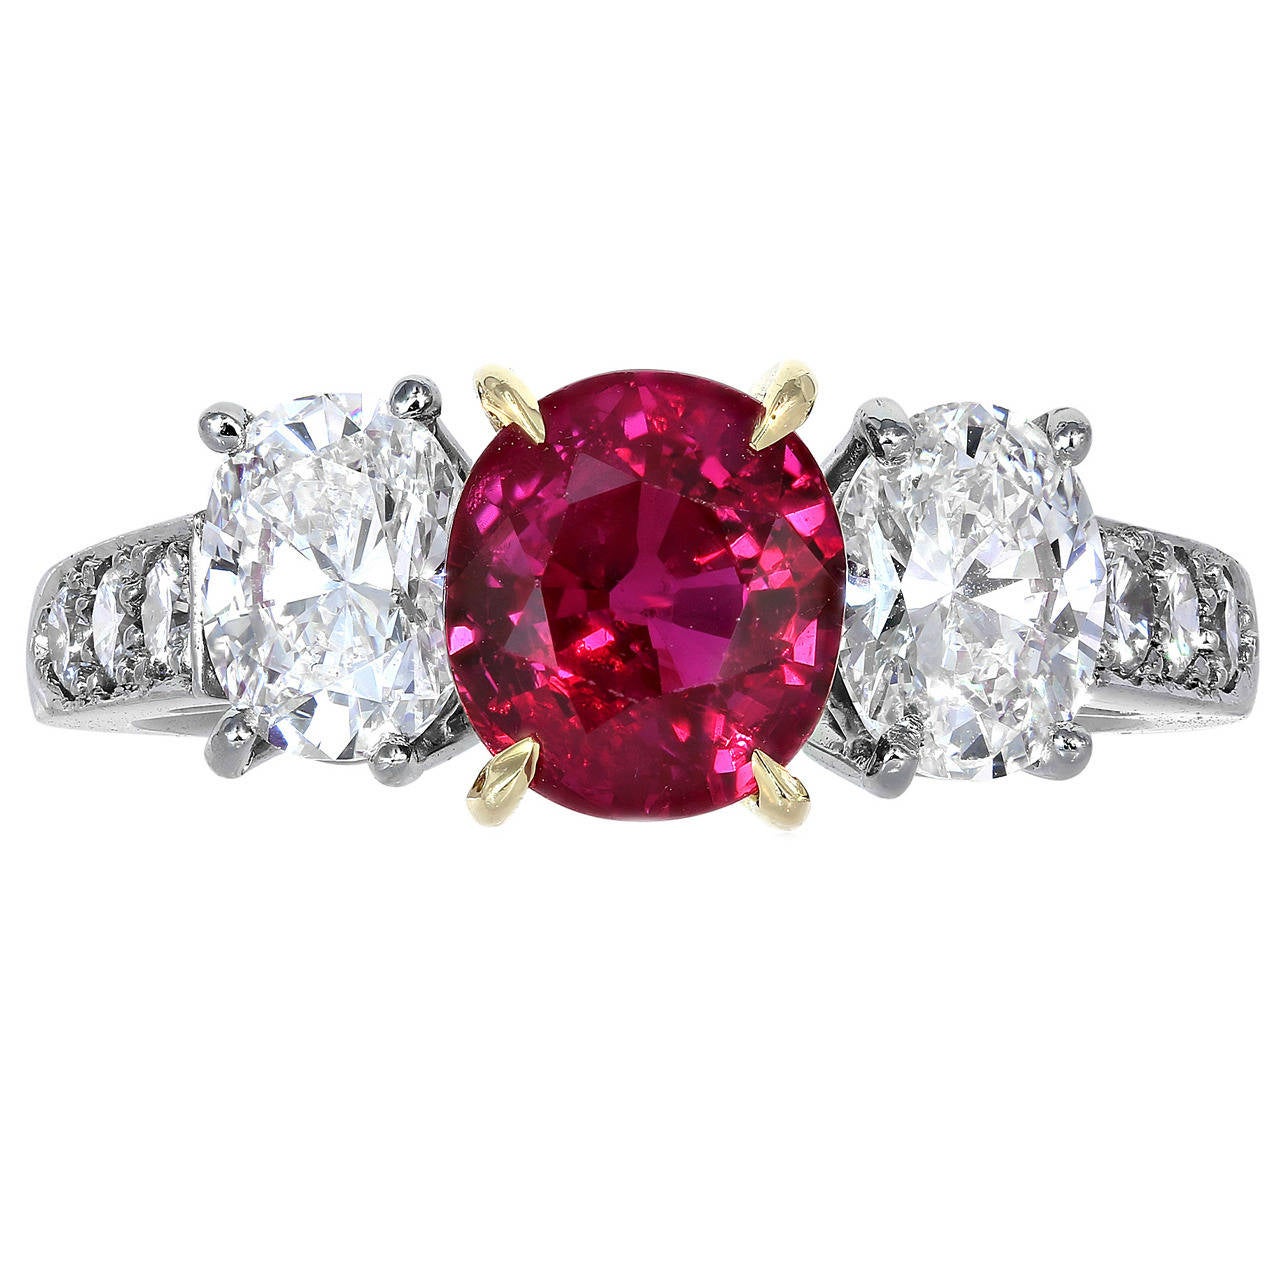 1.98 Carat Ruby Diamond Ring For Sale